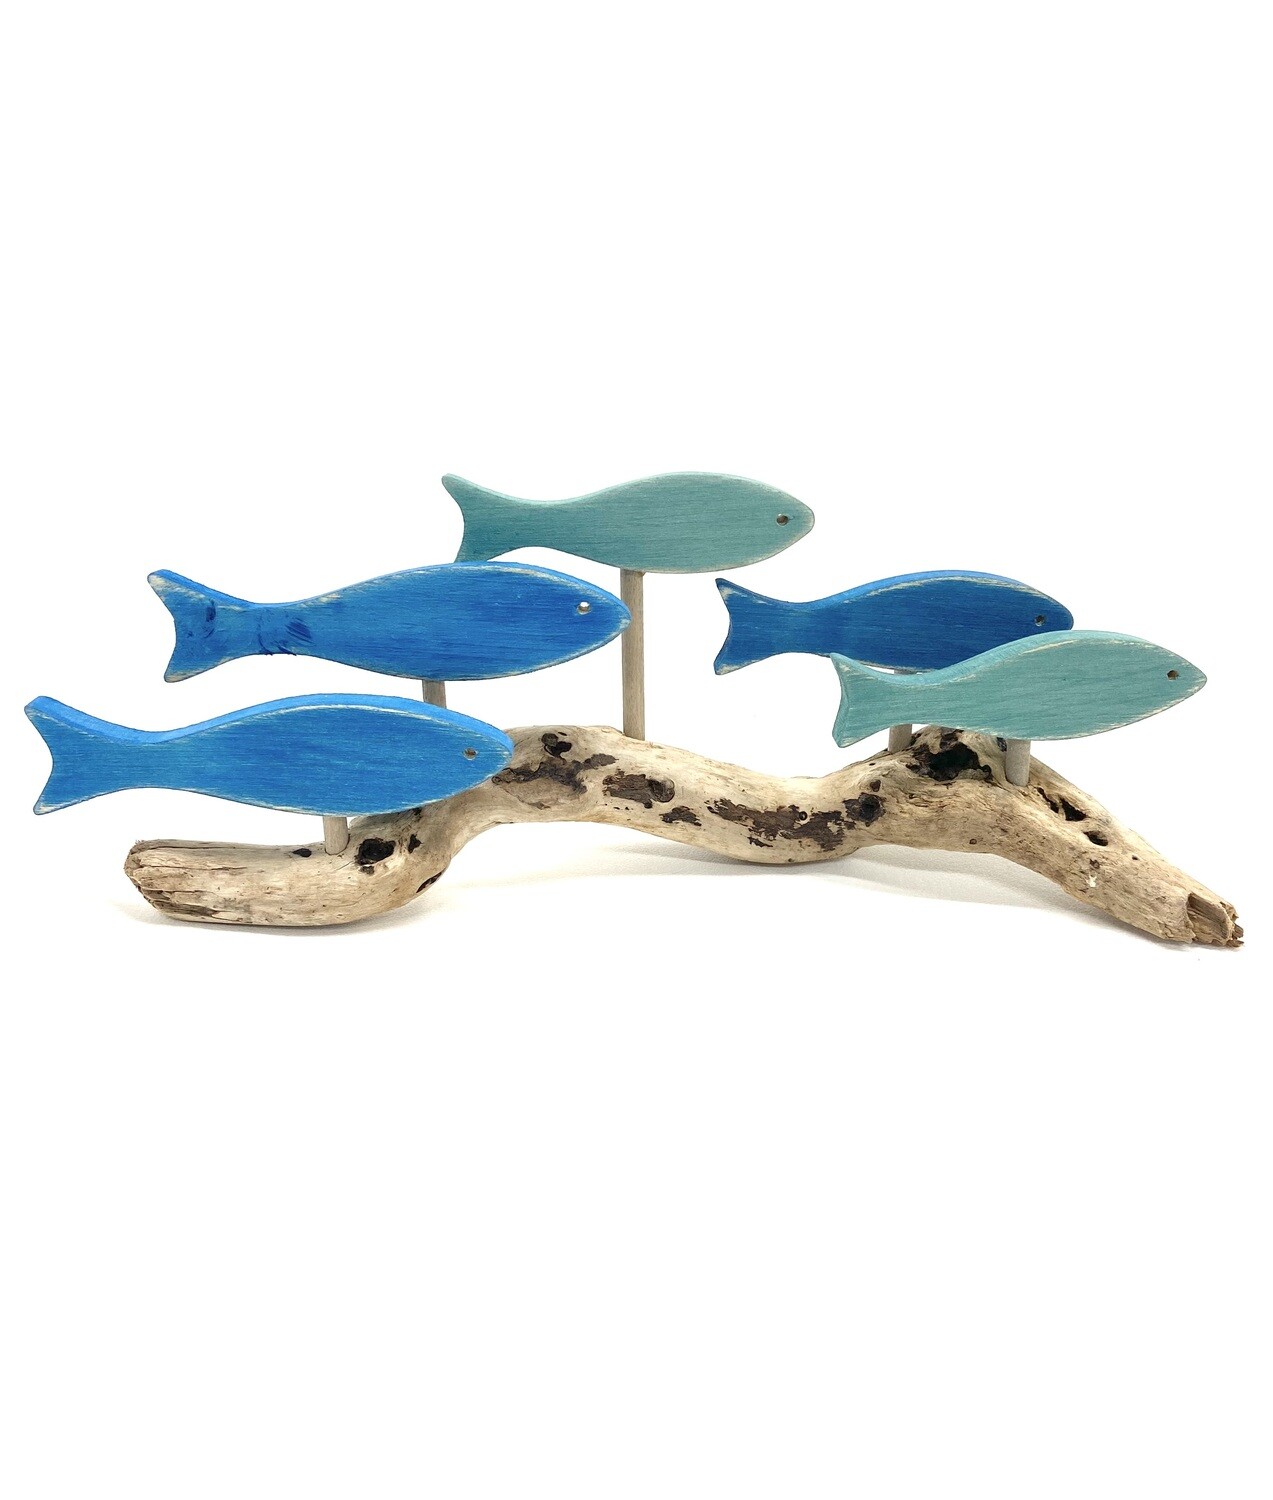 Dark Blue and Teal 5 Fish School - Jerry Walsh